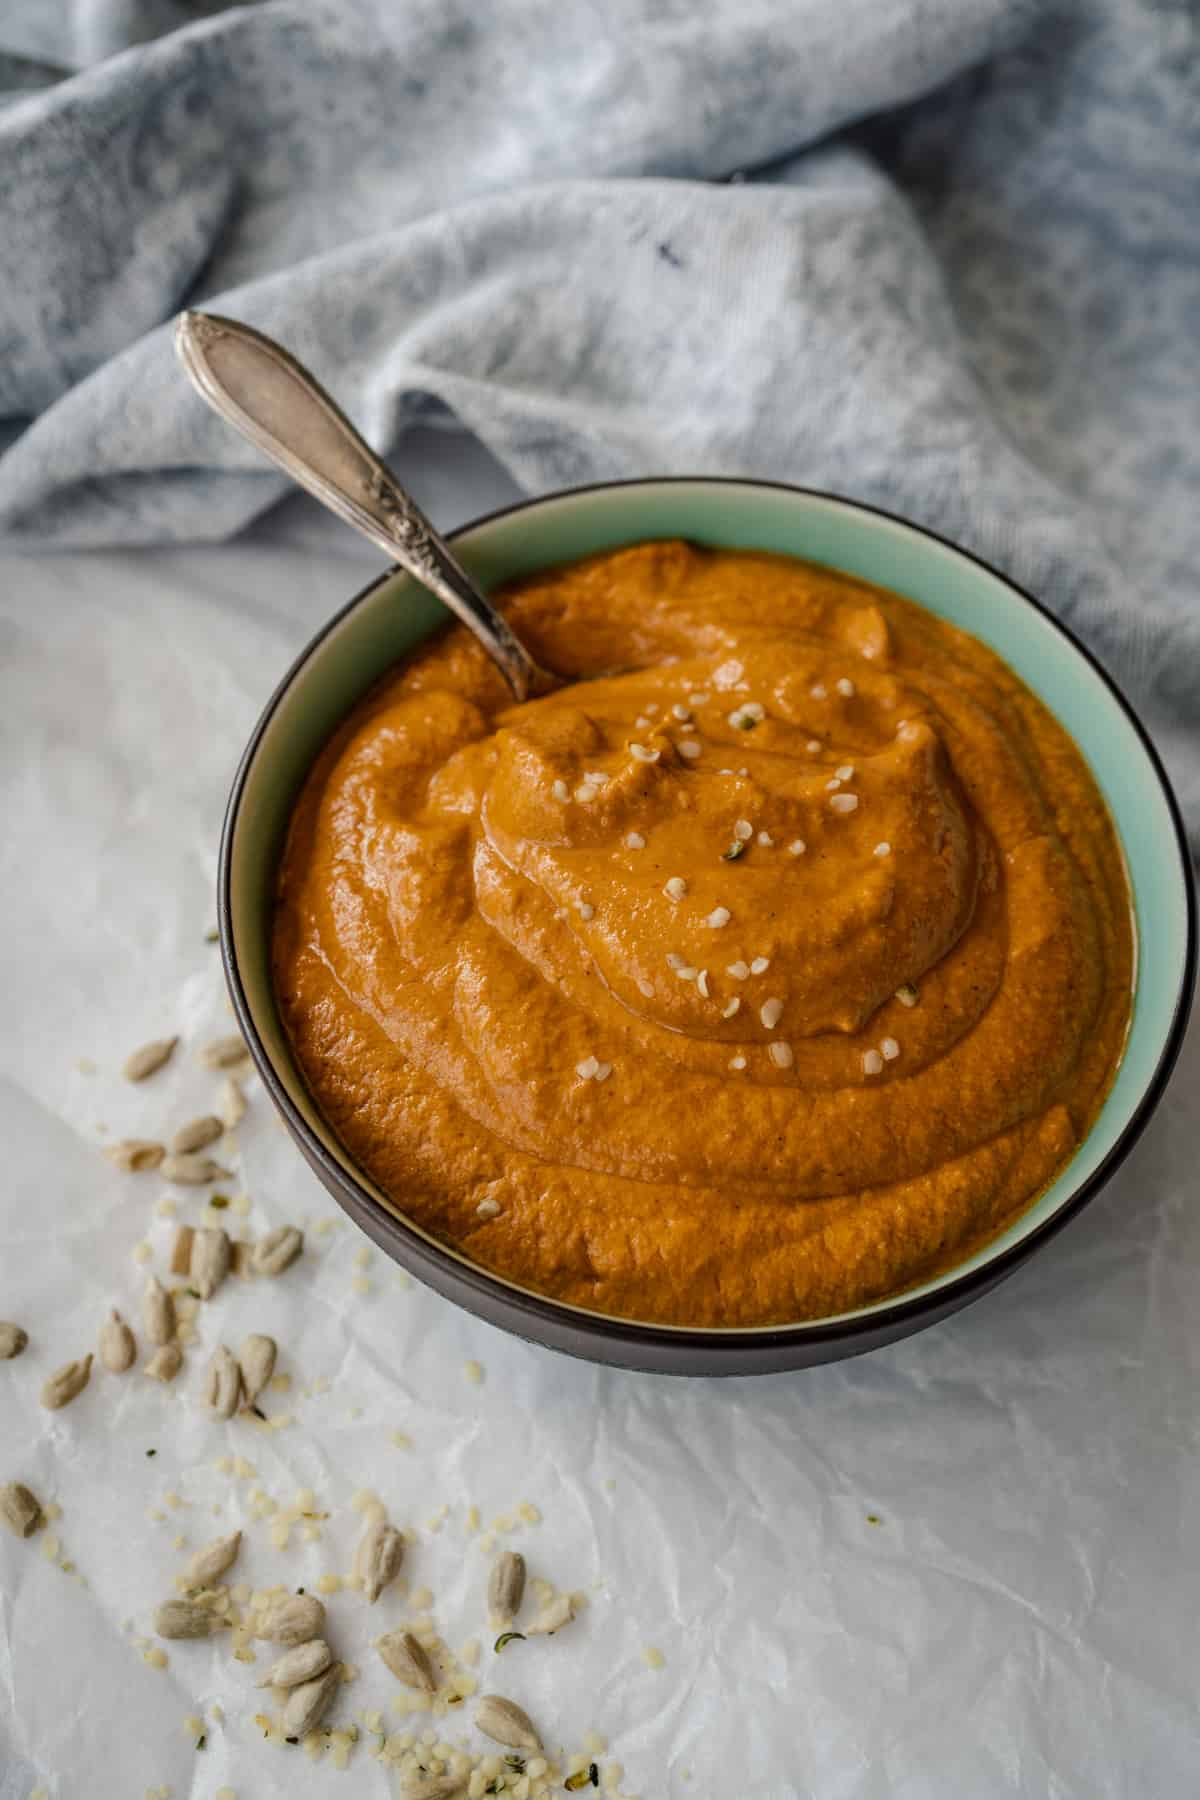 nut free romesco sauce in bowl with serve spoon and sunflower seeds scattered.